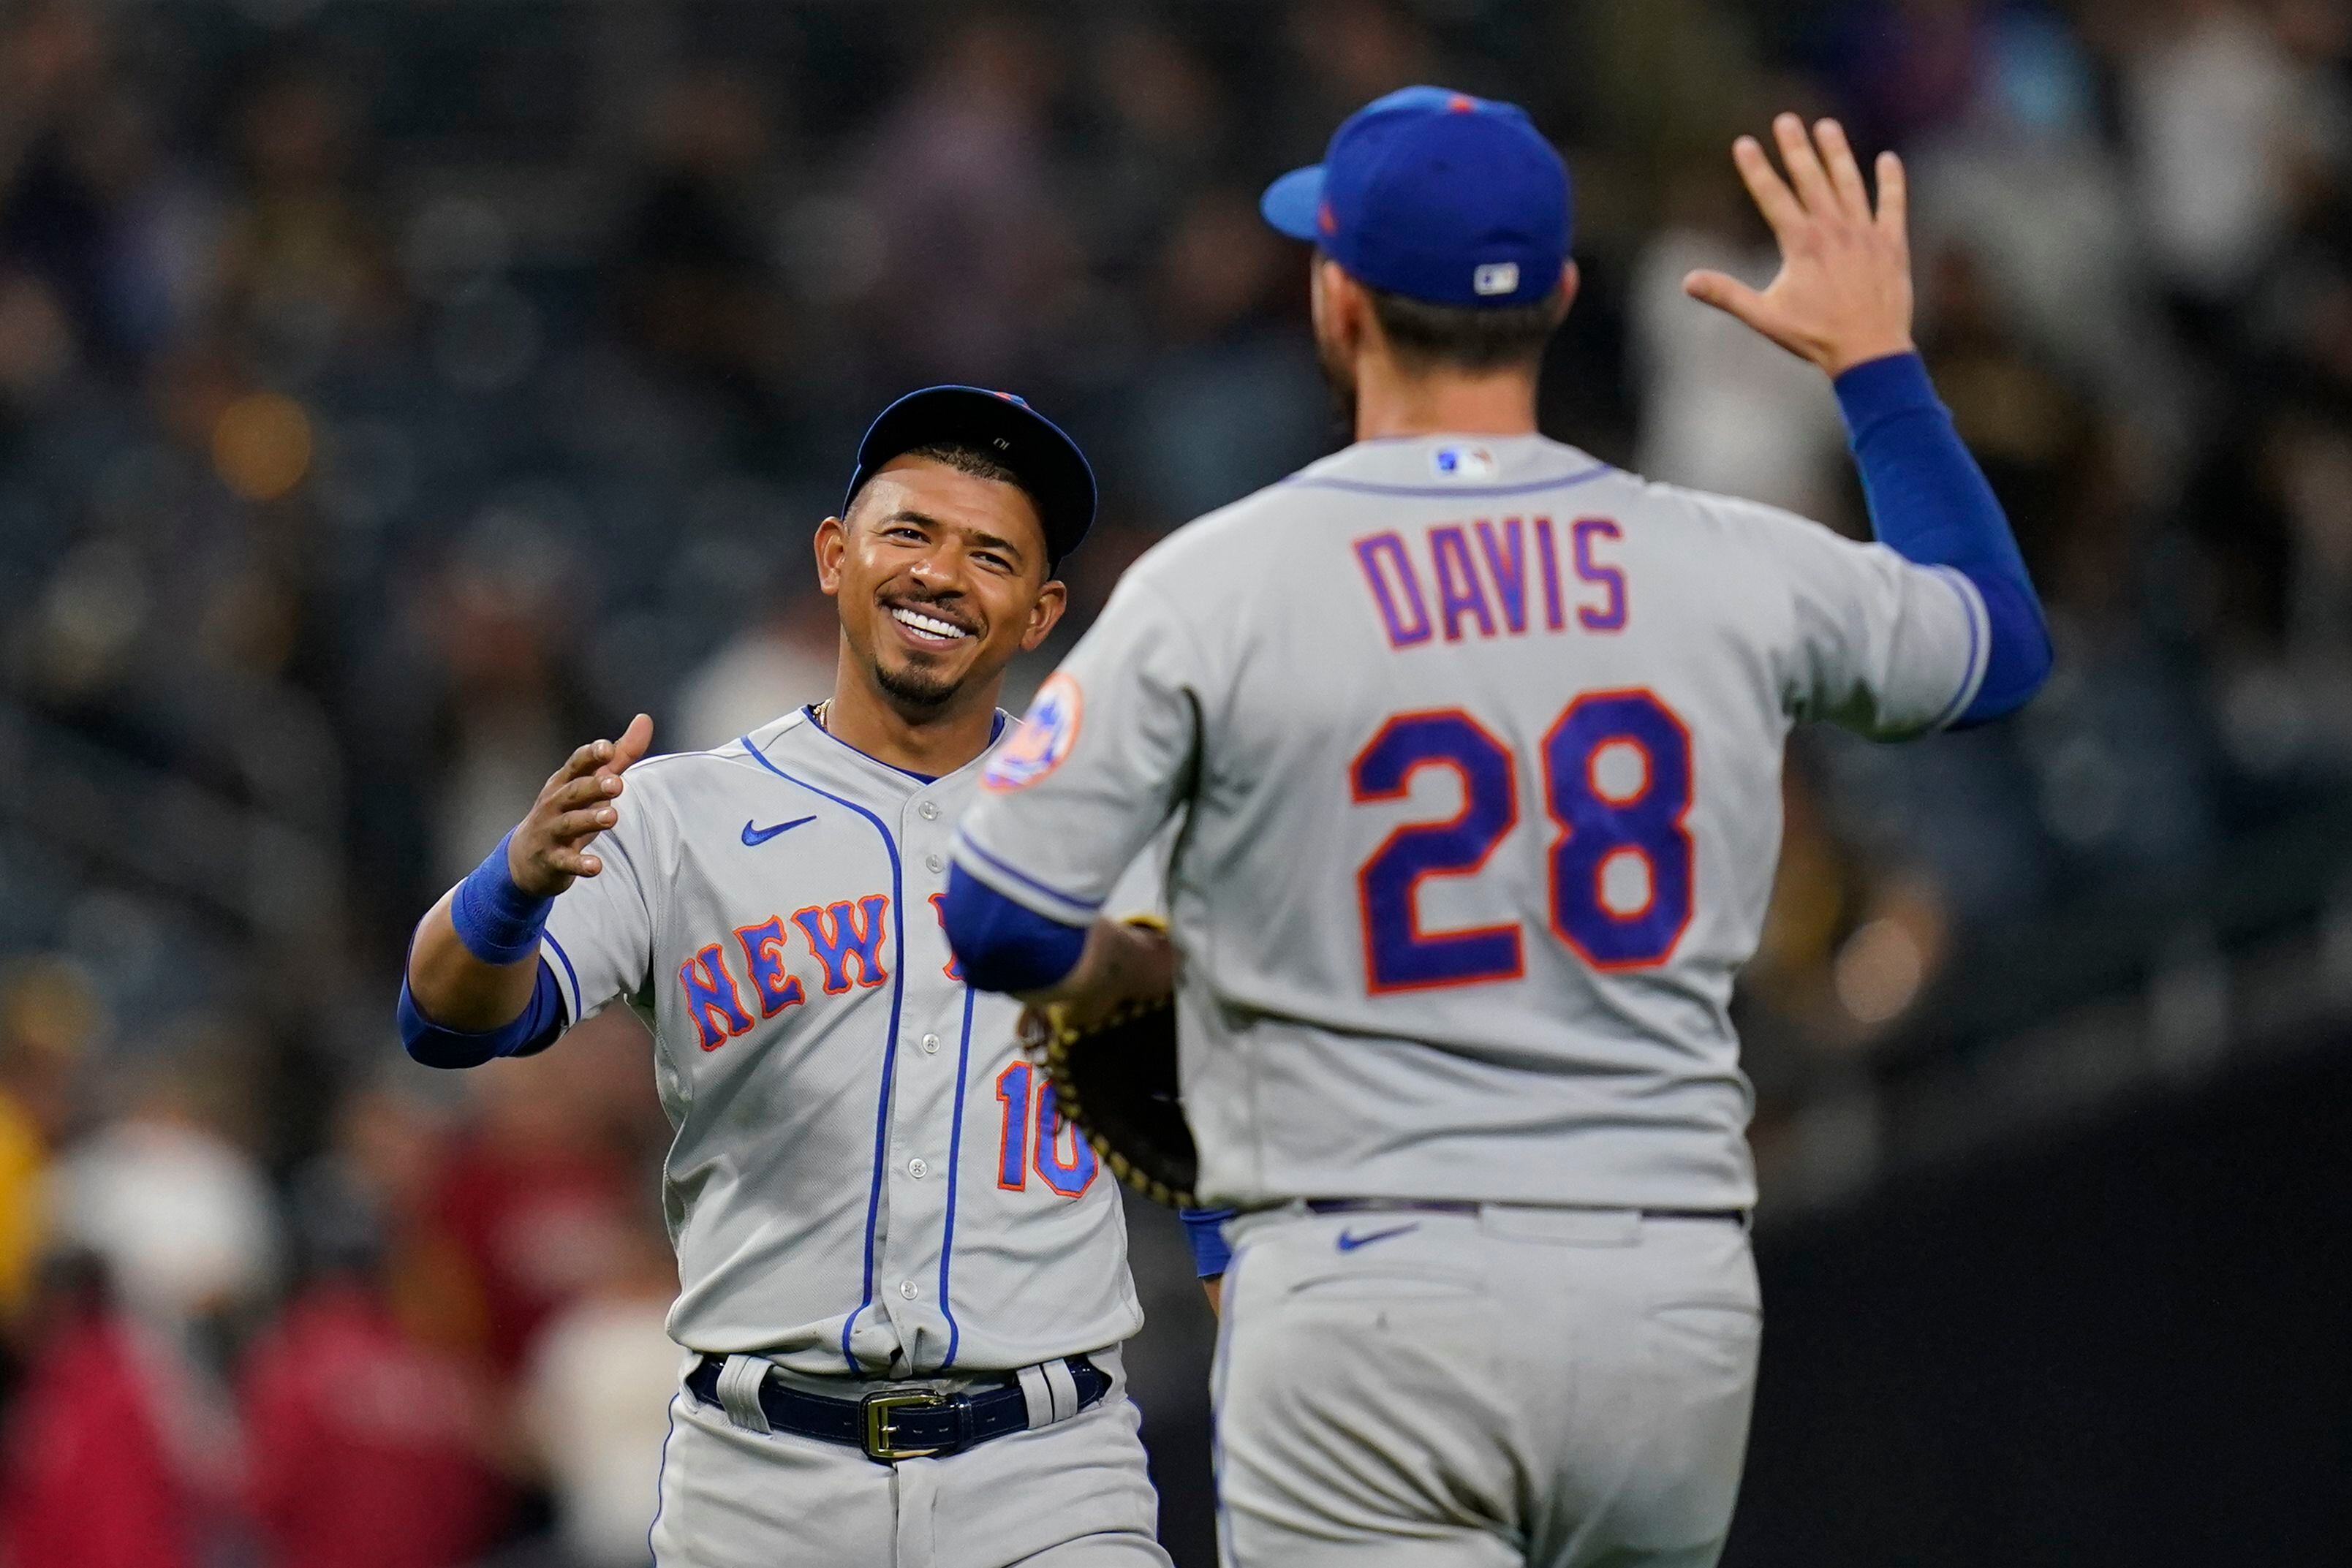 Escobar hits for cycle, has 6 RBIs as Mets beat Padres 11-5